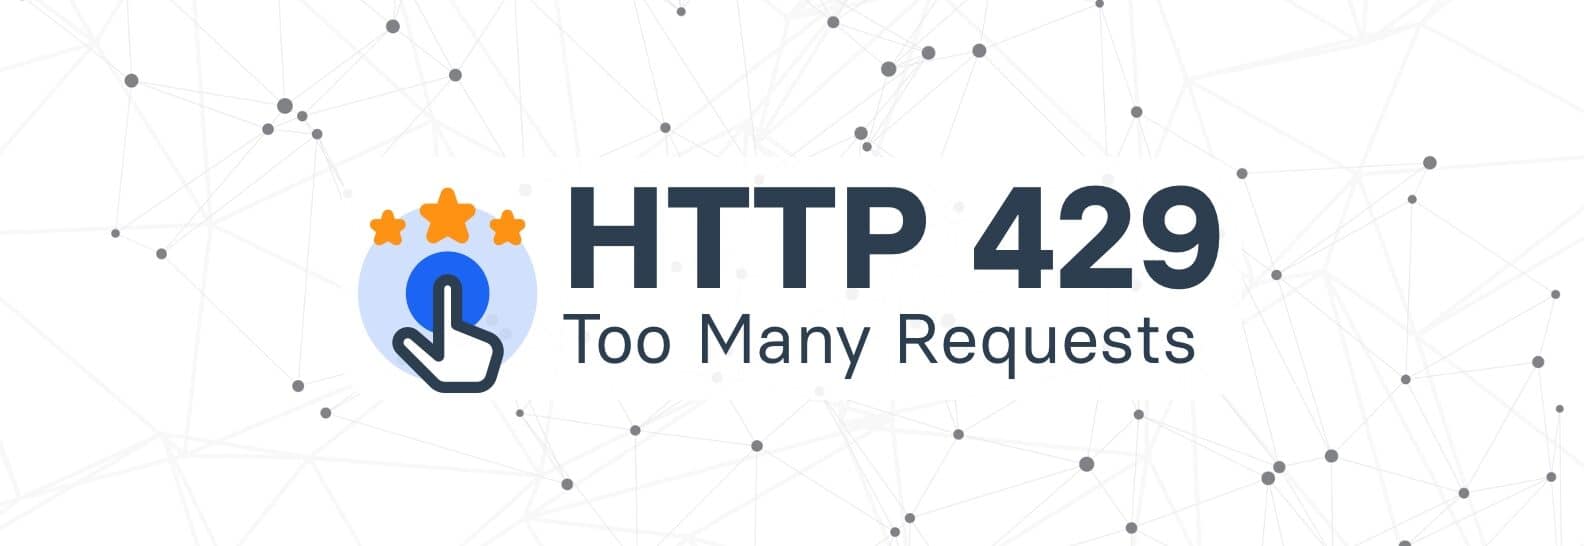 HTTP 429 (Too Many Requests)